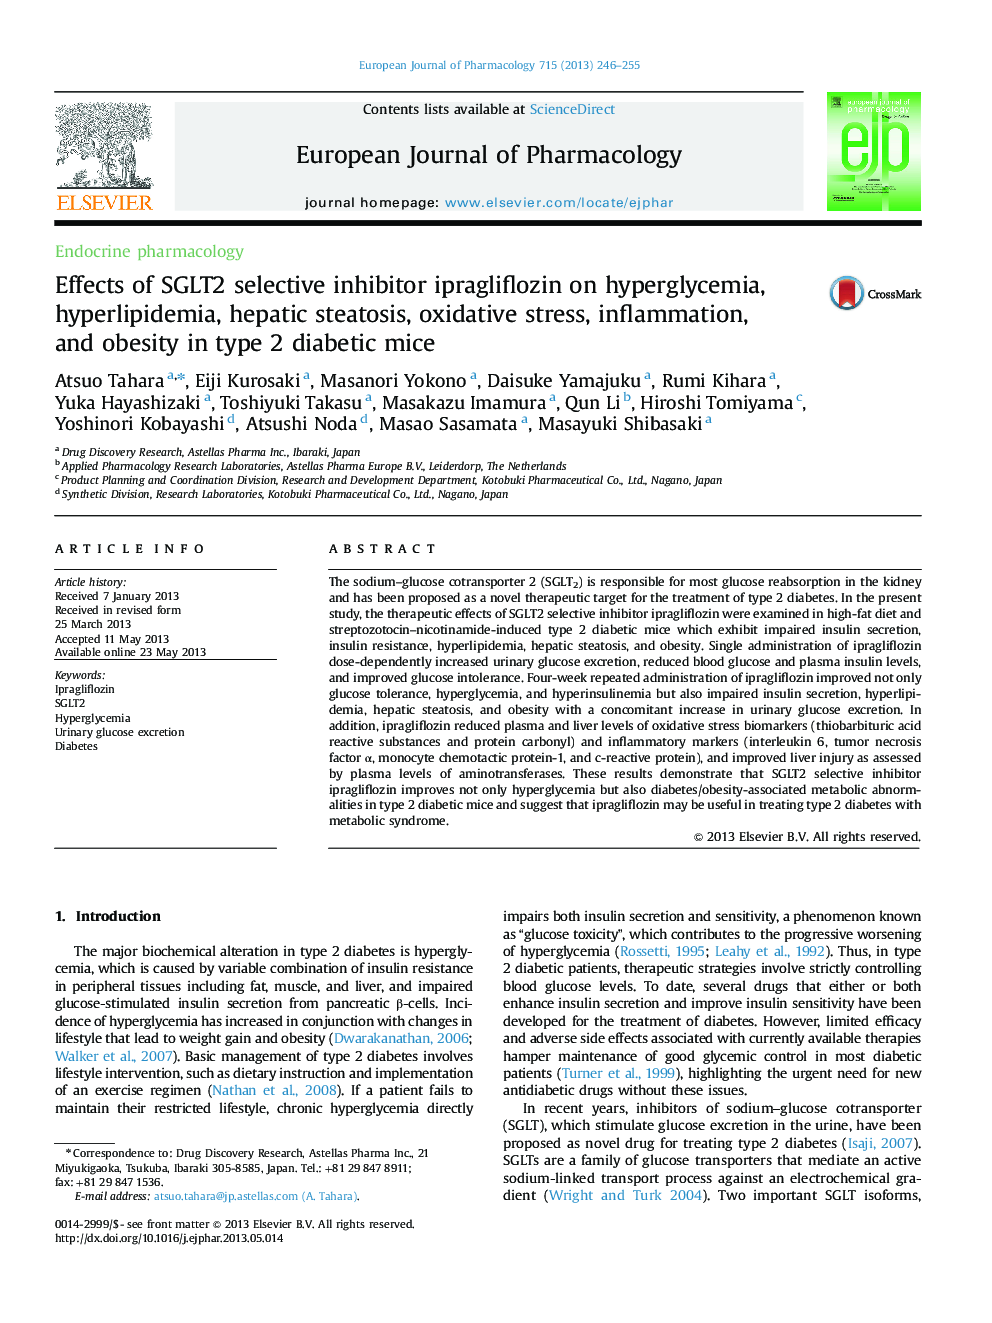 Effects of SGLT2 selective inhibitor ipragliflozin on hyperglycemia, hyperlipidemia, hepatic steatosis, oxidative stress, inflammation, and obesity in type 2 diabetic mice